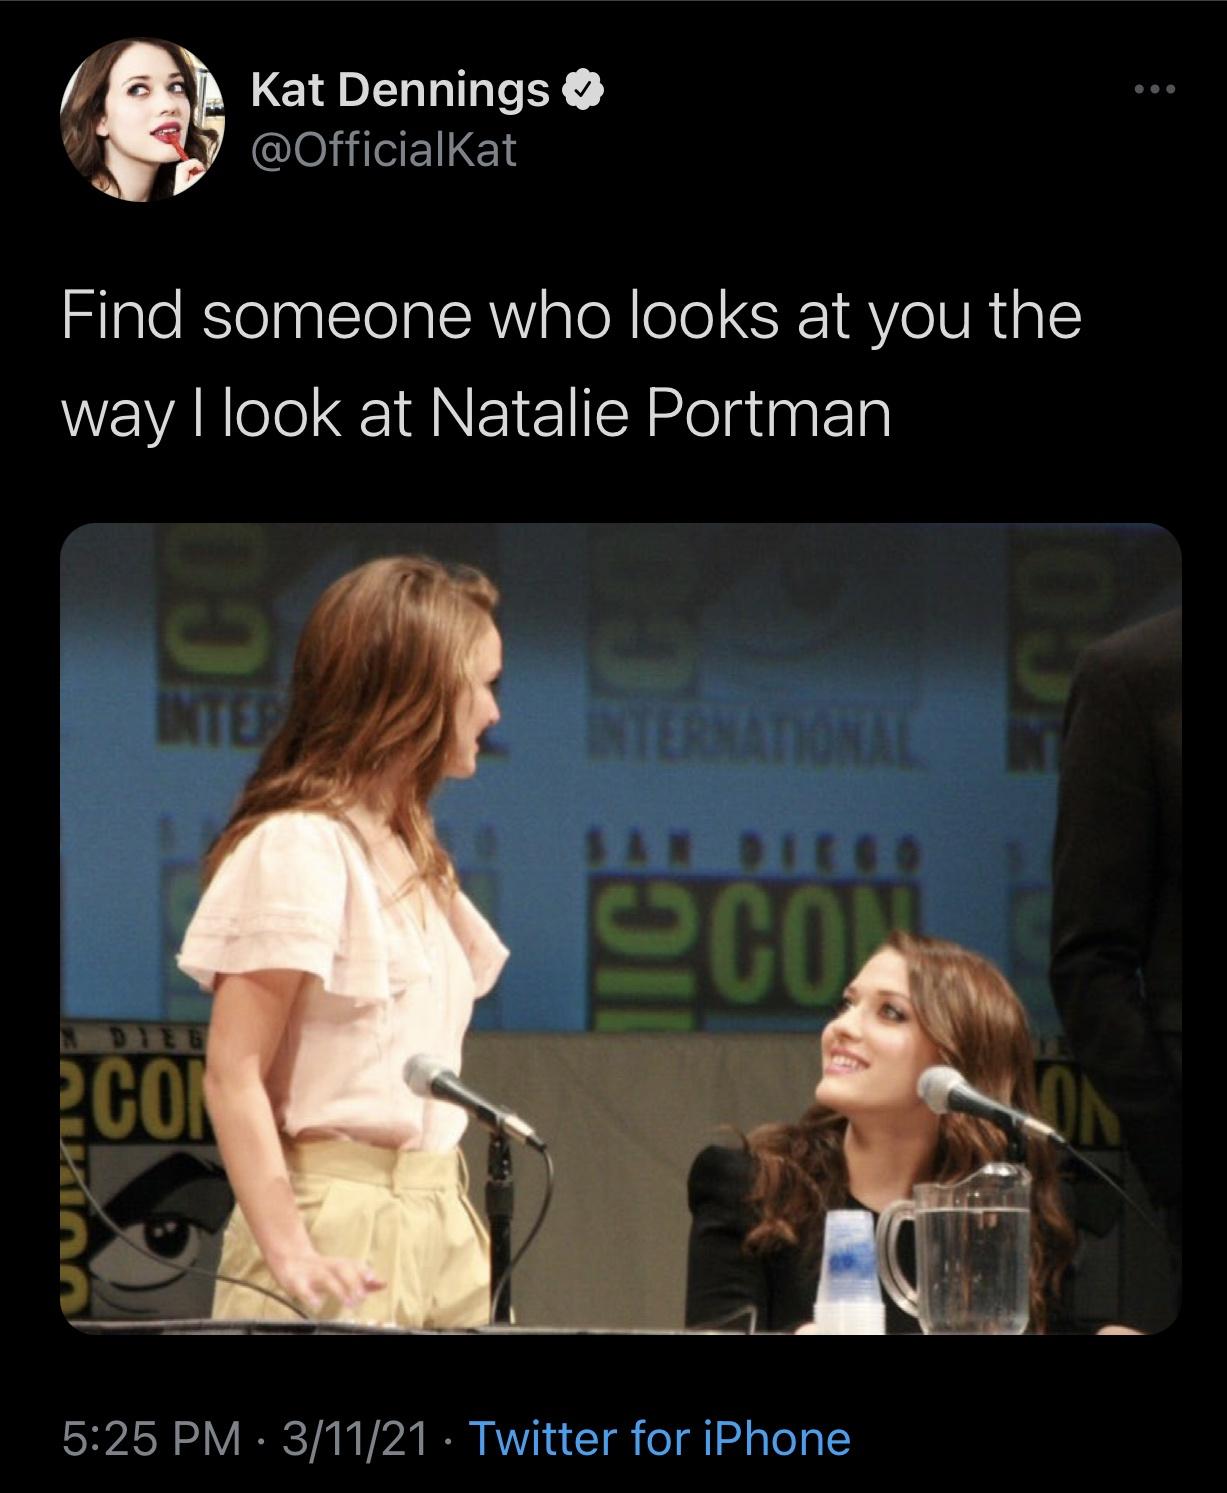 awesome pics and funny memes - tom hiddleston and kat denning - Kat Dennings Find someone who looks at you the way I look at Natalie Portman Inted International Dies Tice 200, Acon 31121 Twitter for iPhone